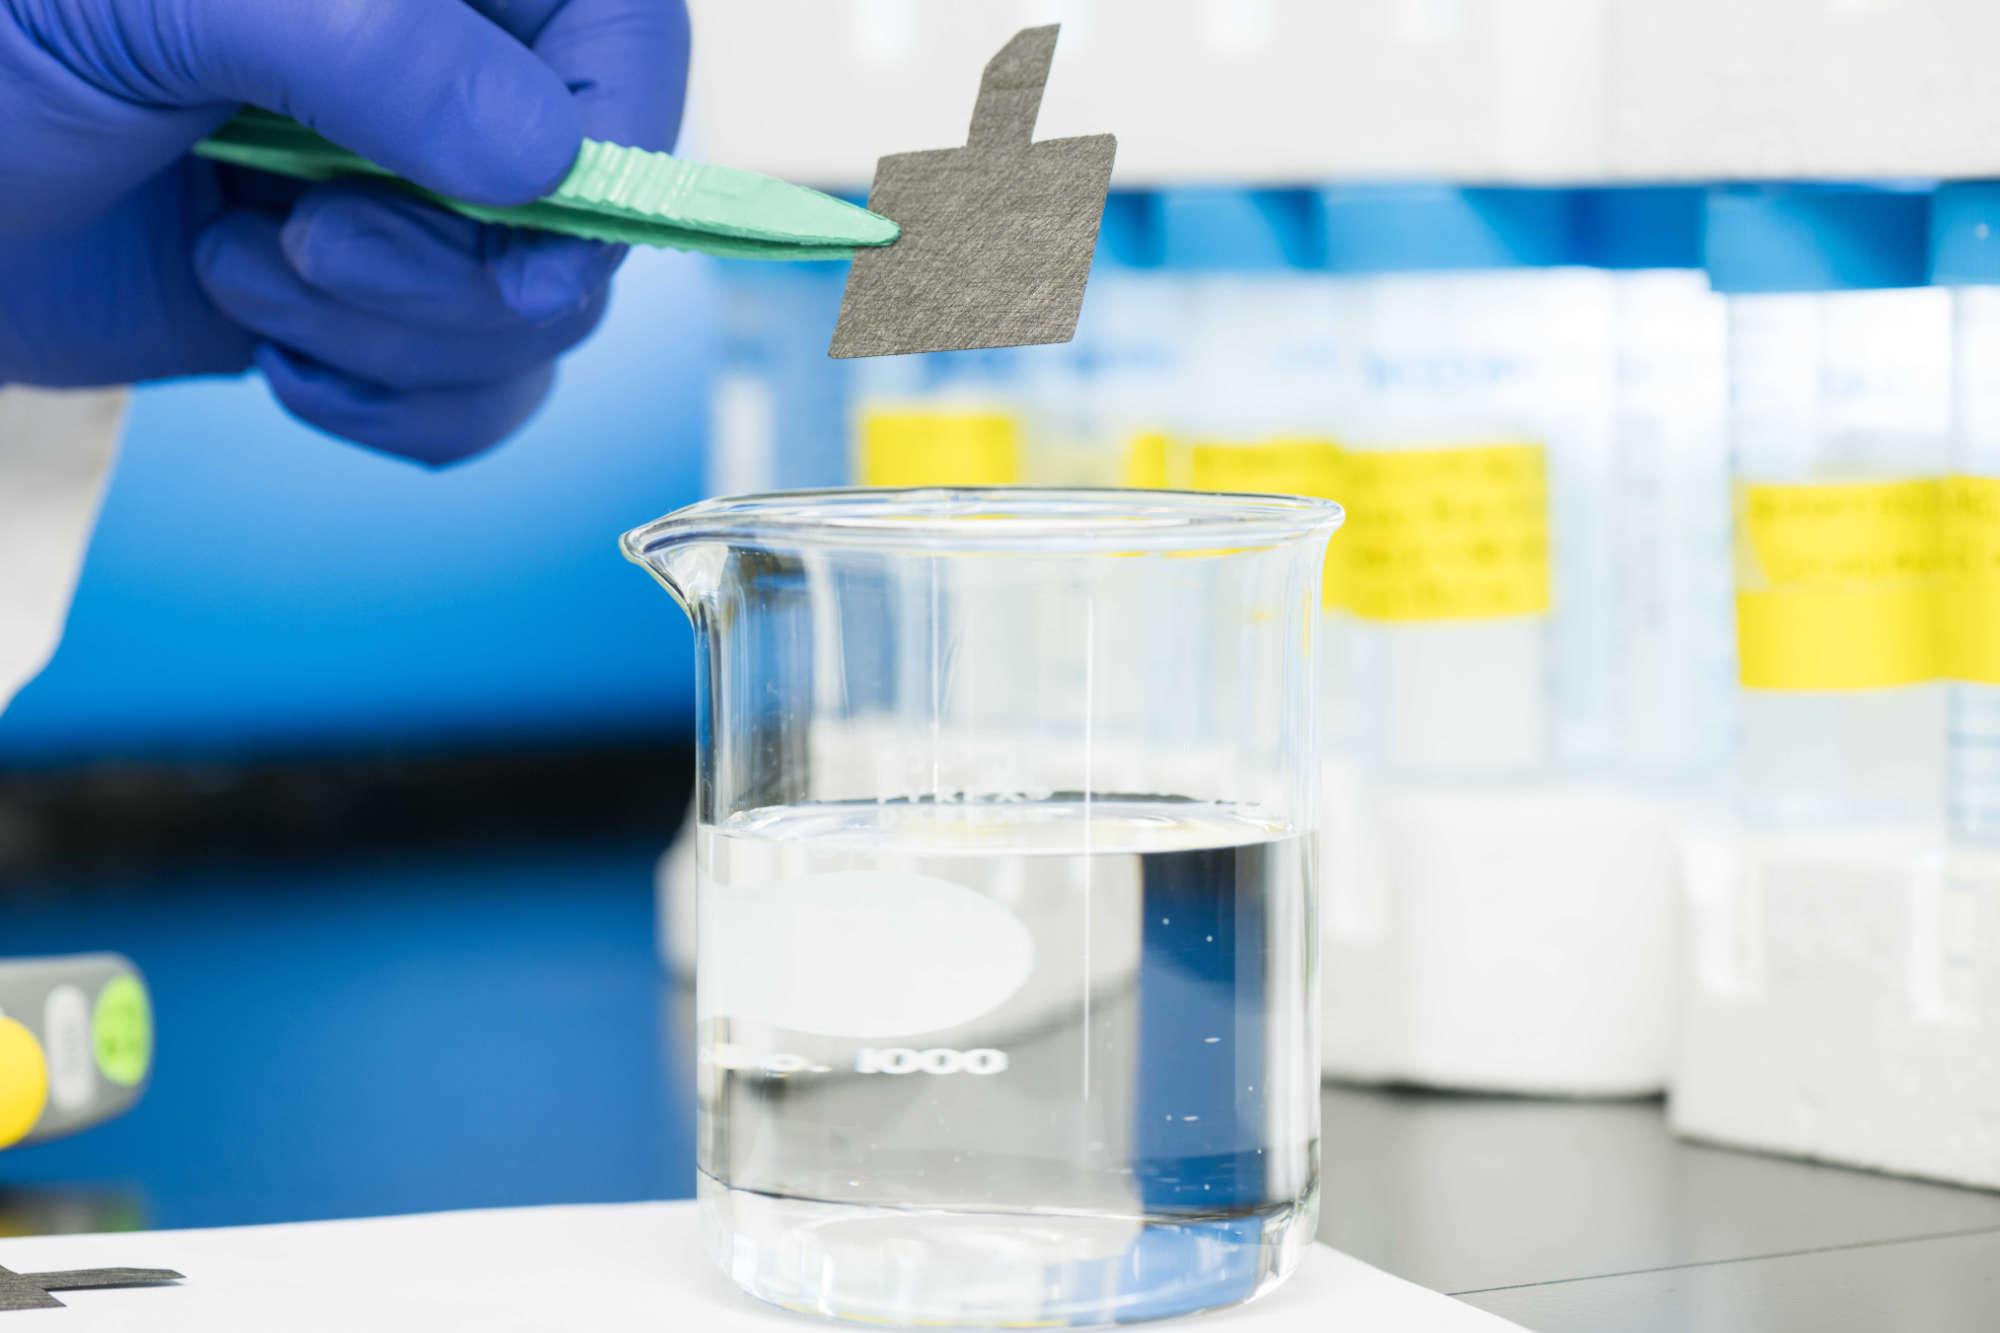 A gloved hands uses tweezers to hold carbon paper above a glass beaker filled with water to illustrate a new technique to remediate PFAS chemicals.